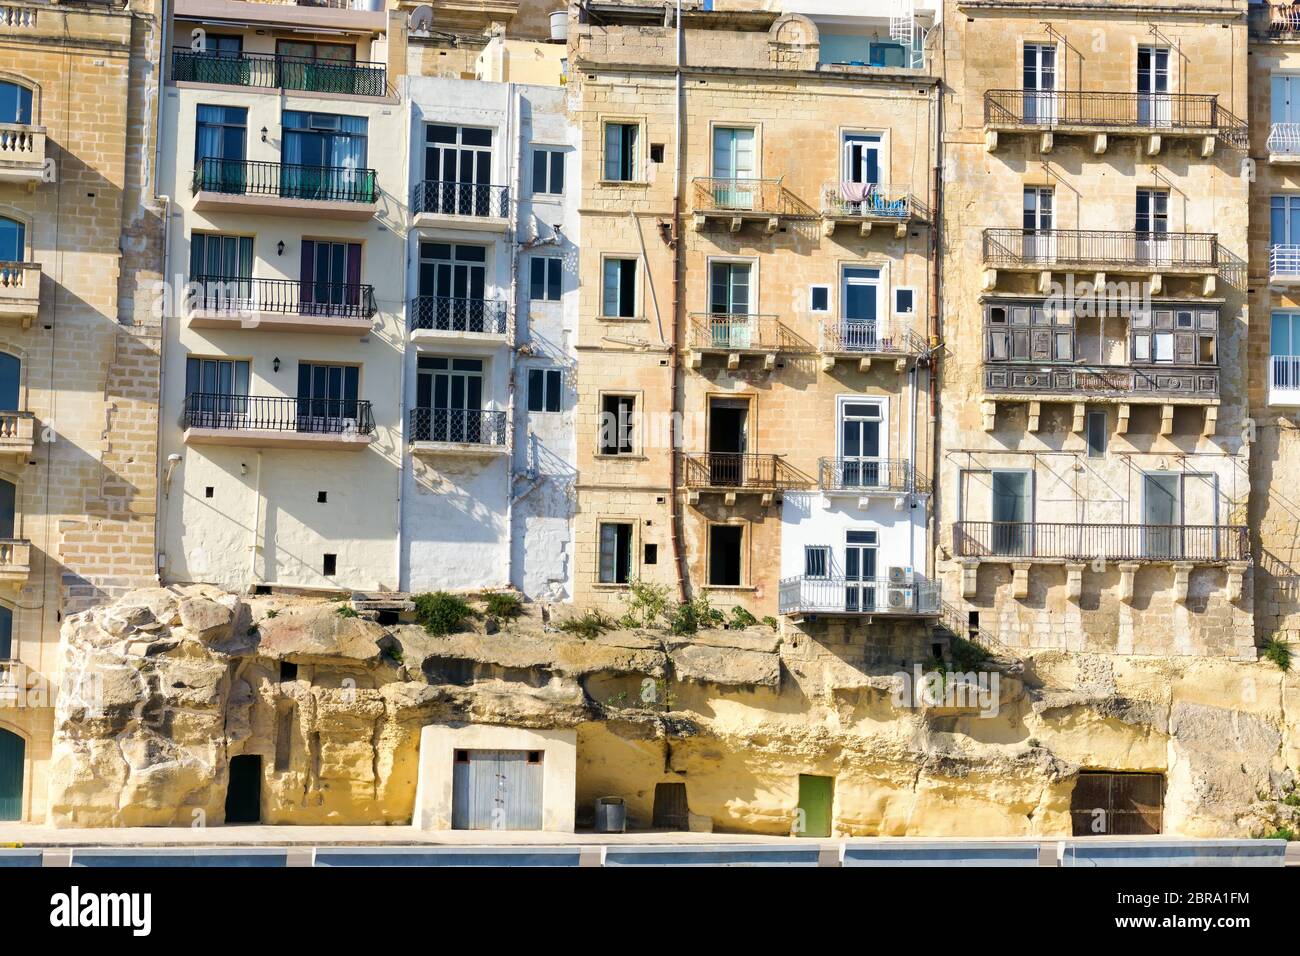 View of the old buildings in Valletta, Malta Stock Photo